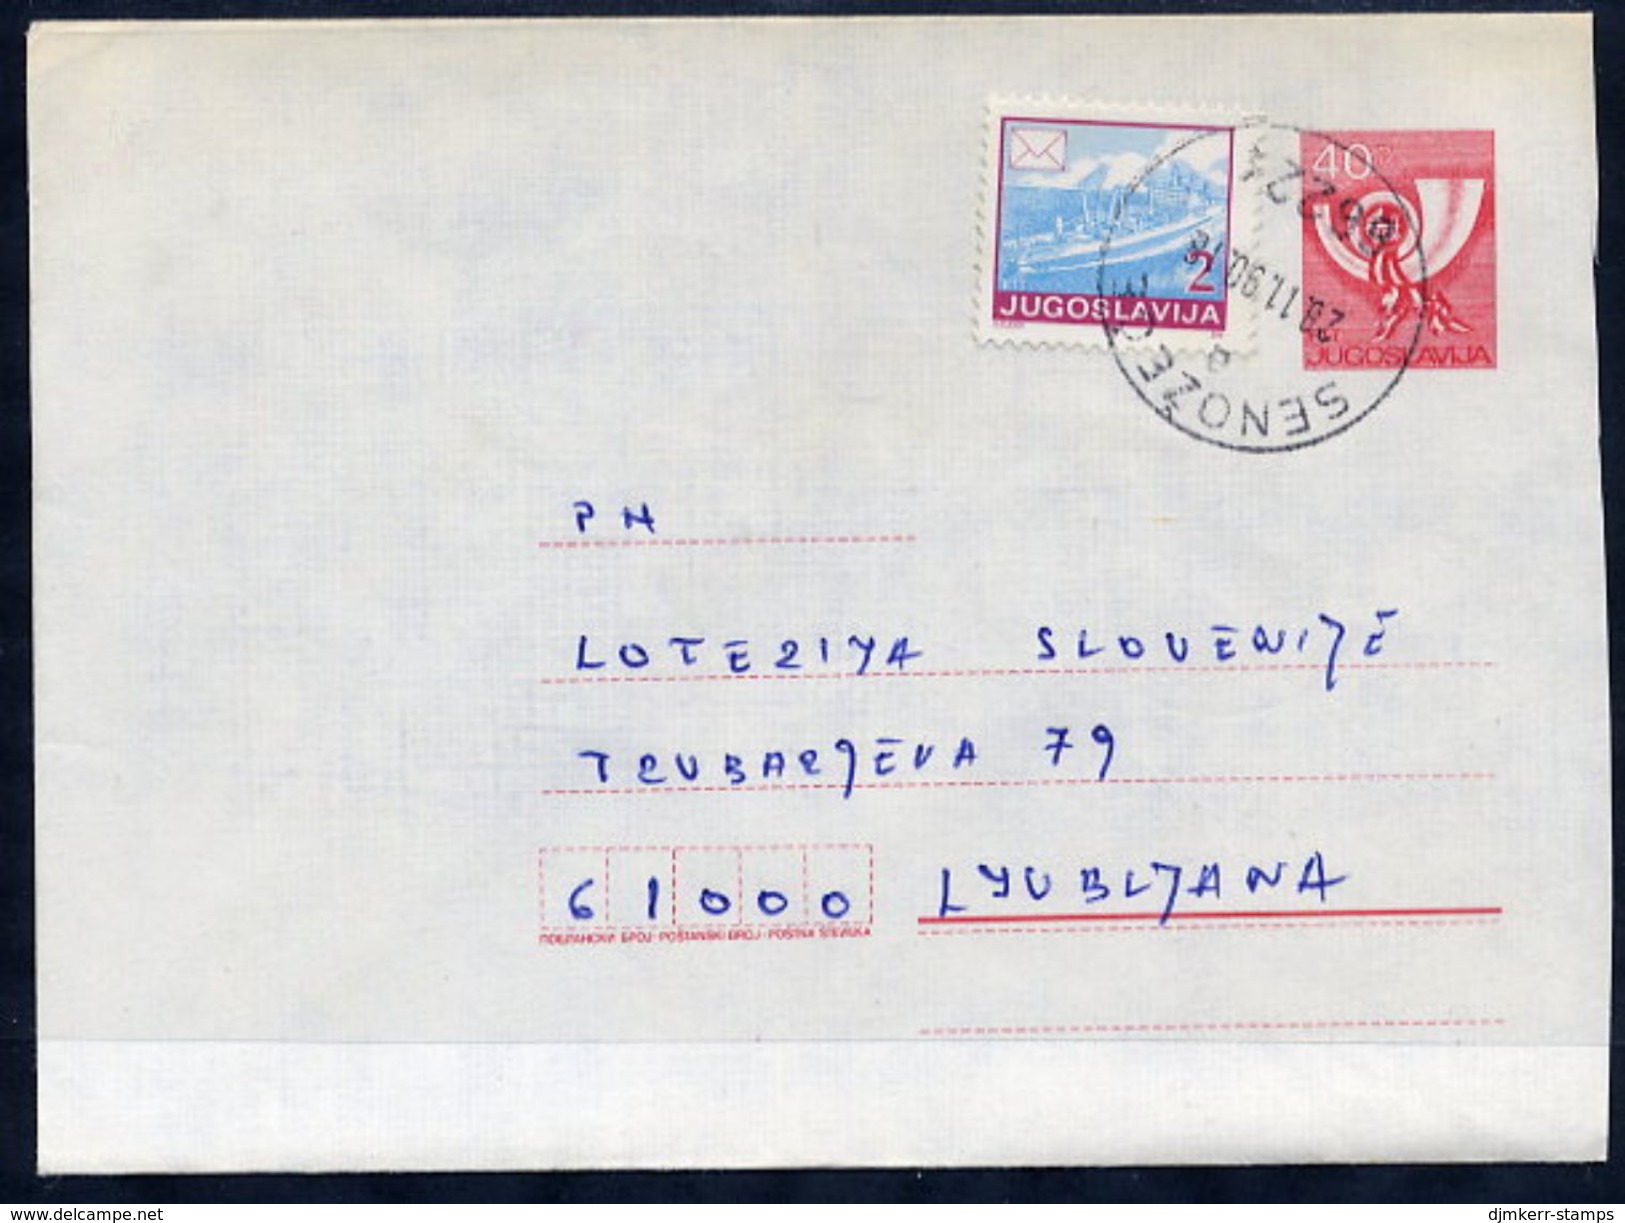 YUGOSLAVIA 1986 Posthorn 40 D.stationery Envelope Format A  Used With Additional Franking.  Michel U76A - Postal Stationery